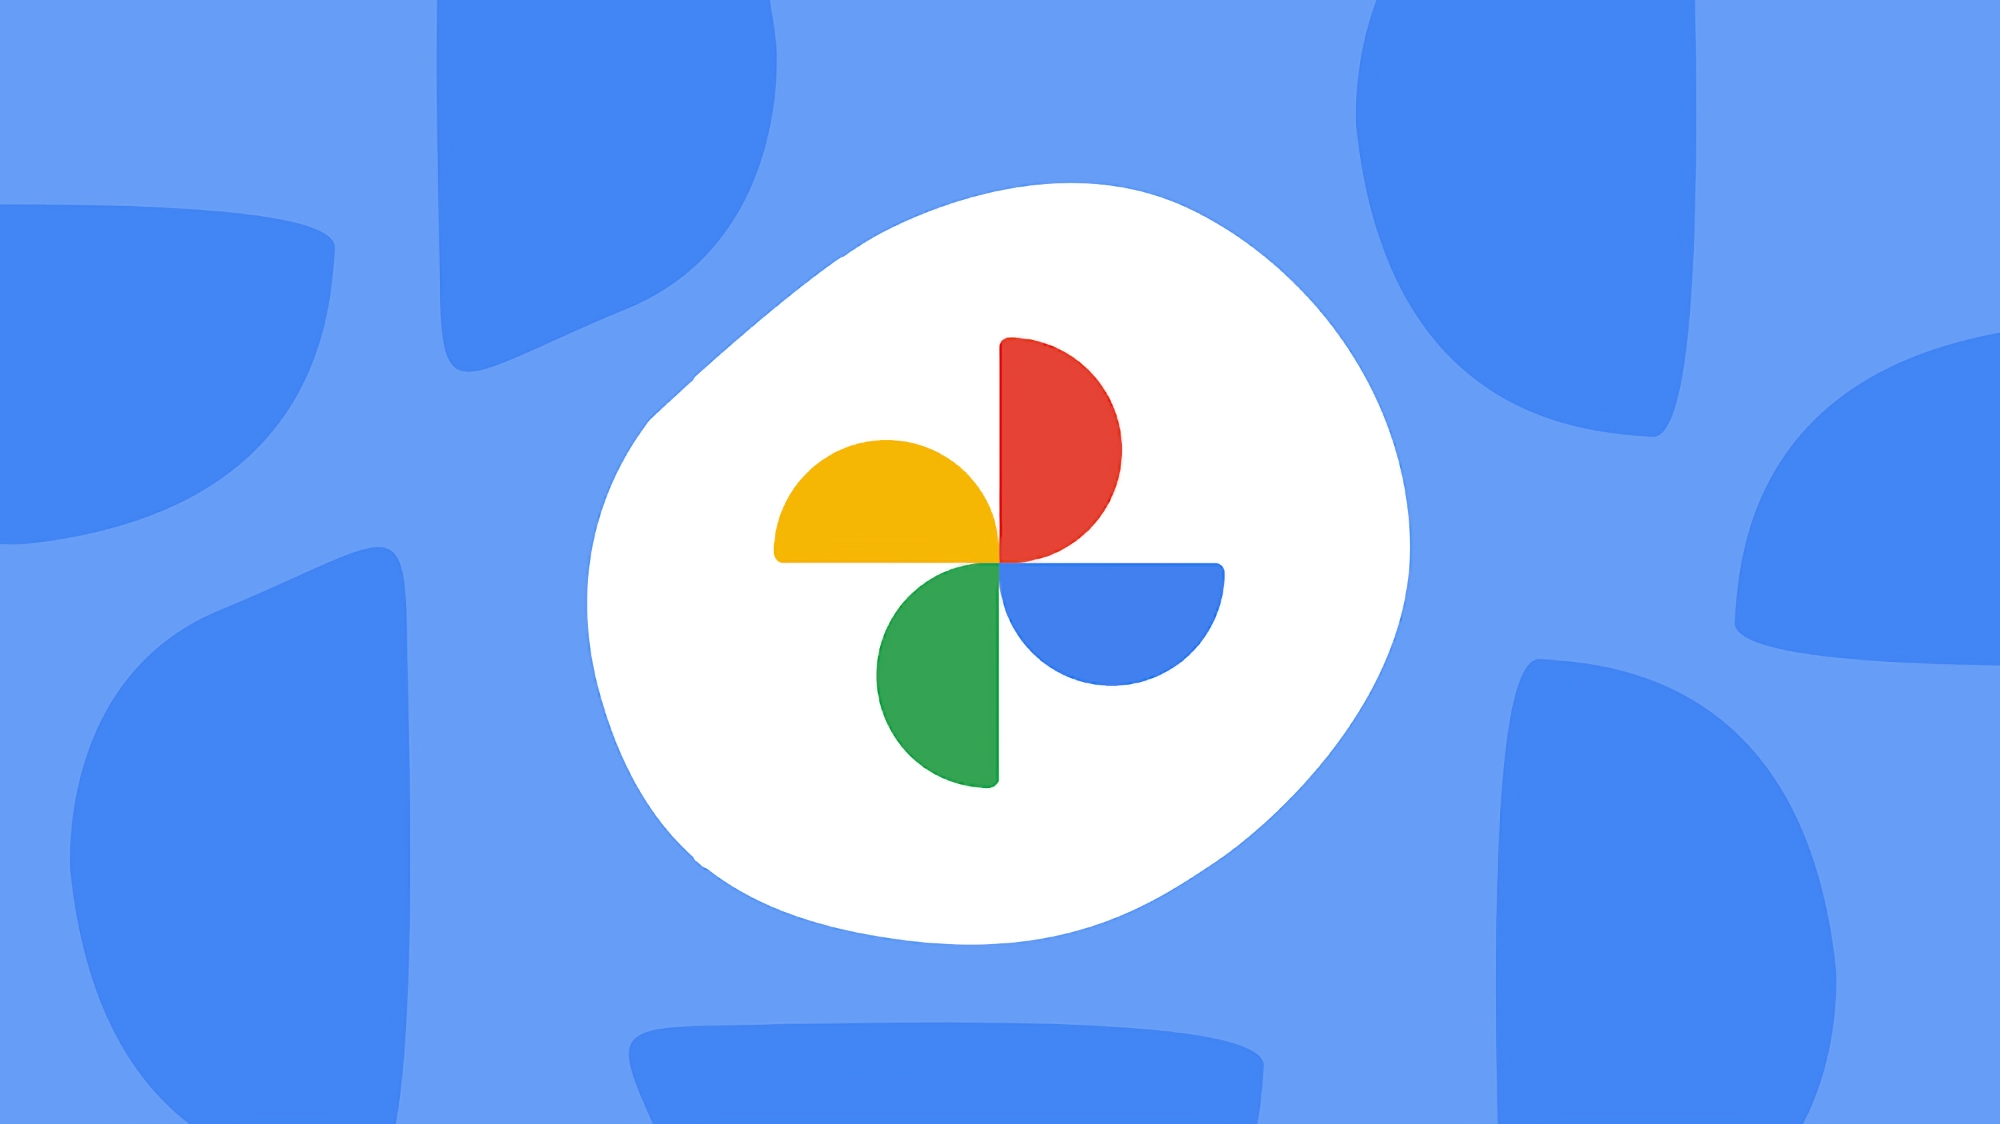 The web version of Google Photos has new photo editing features